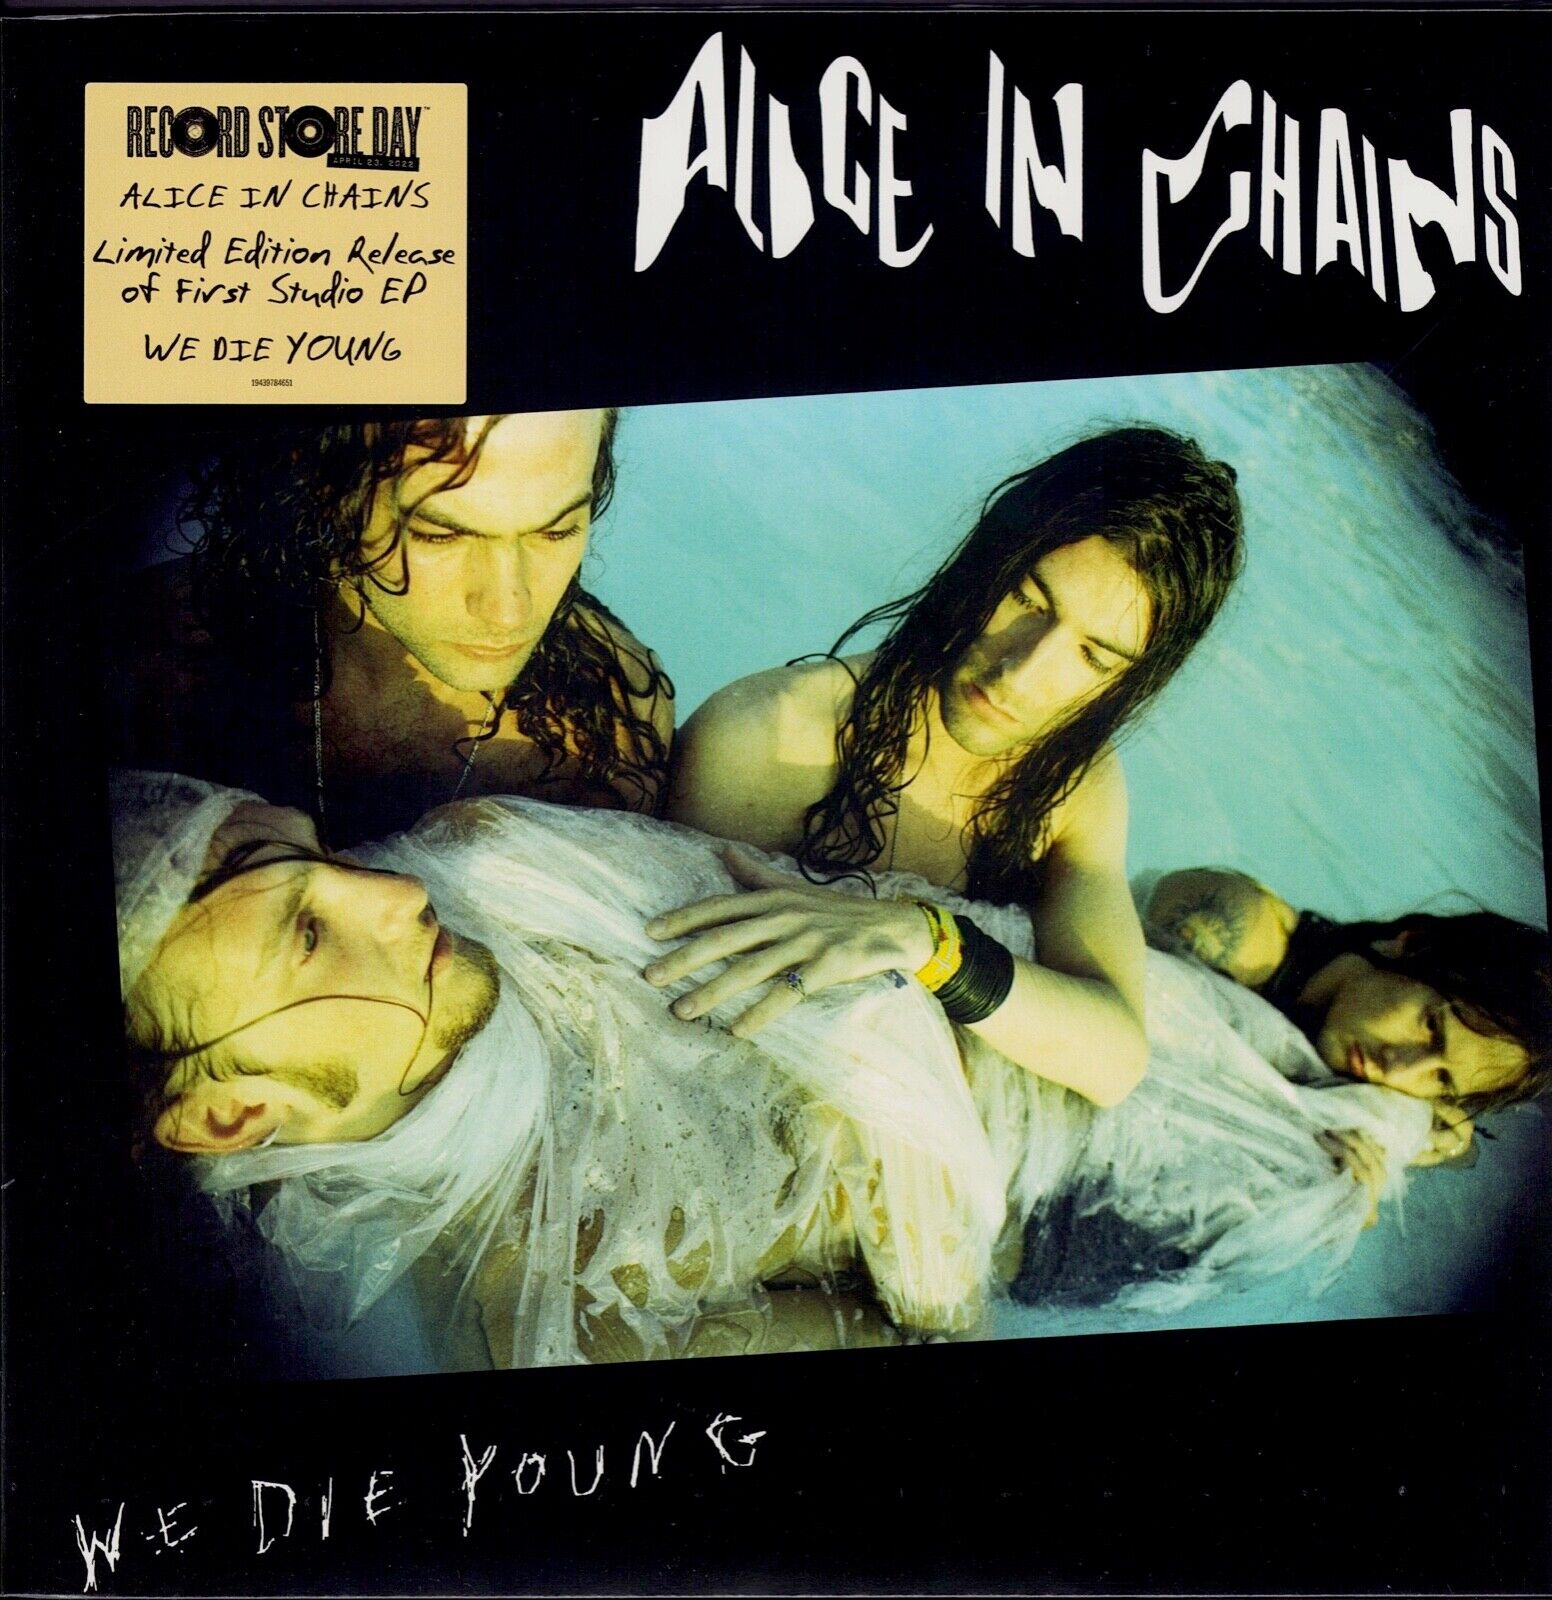 Alice In Chains ‎- We Die Young Vinyl 12" EP